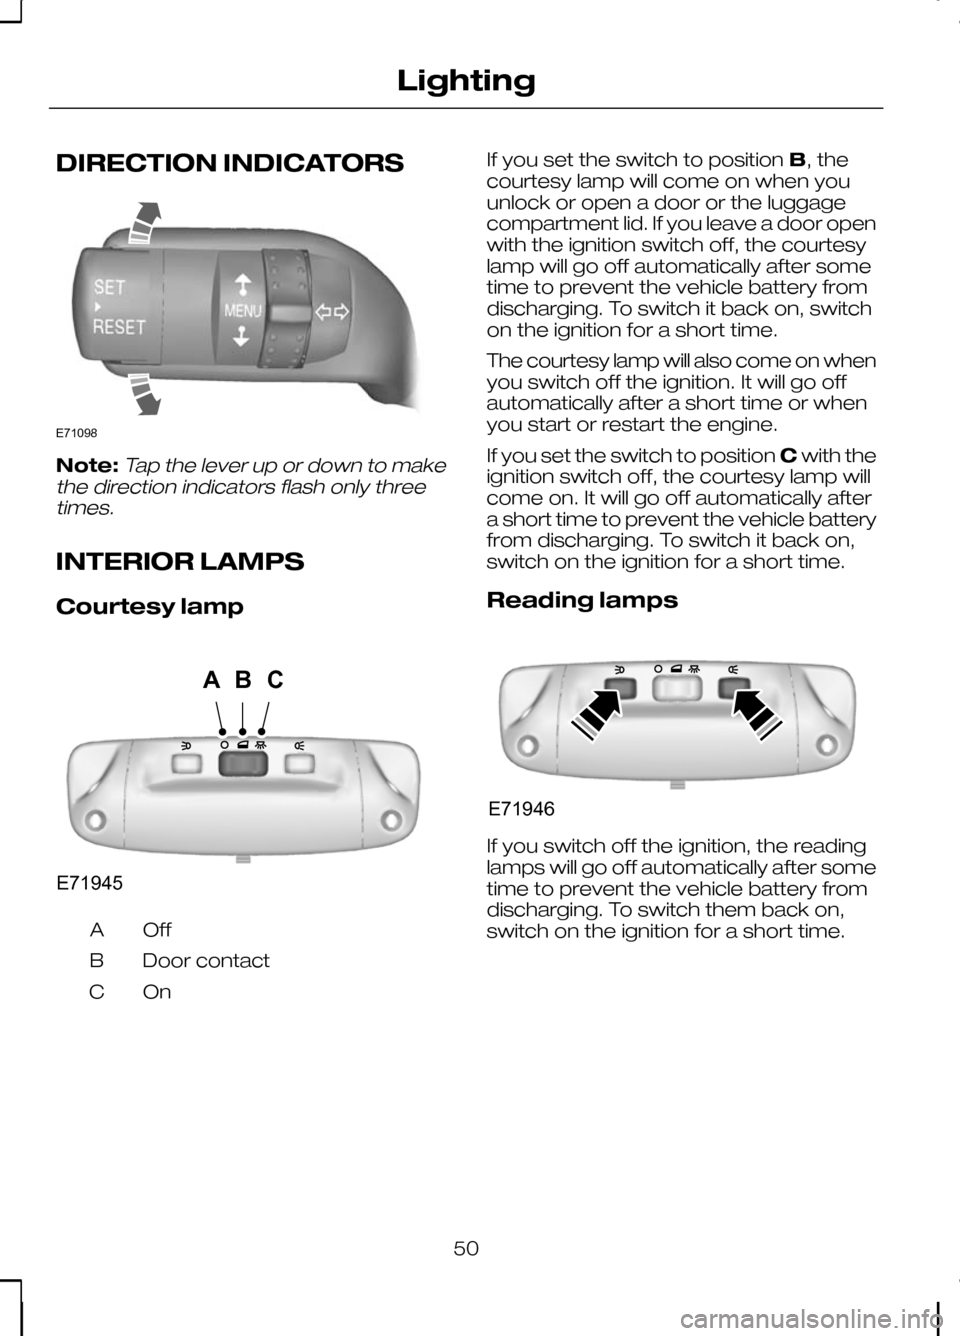 FORD KUGA 2010 1.G User Guide DIRECTION INDICATORS
Note:Tap the lever up or down to make
the direction indicators flash only three times.
INTERIOR LAMPS
Courtesy lamp OffA
Door contact
B
OnC If you set the switch to position
B, th